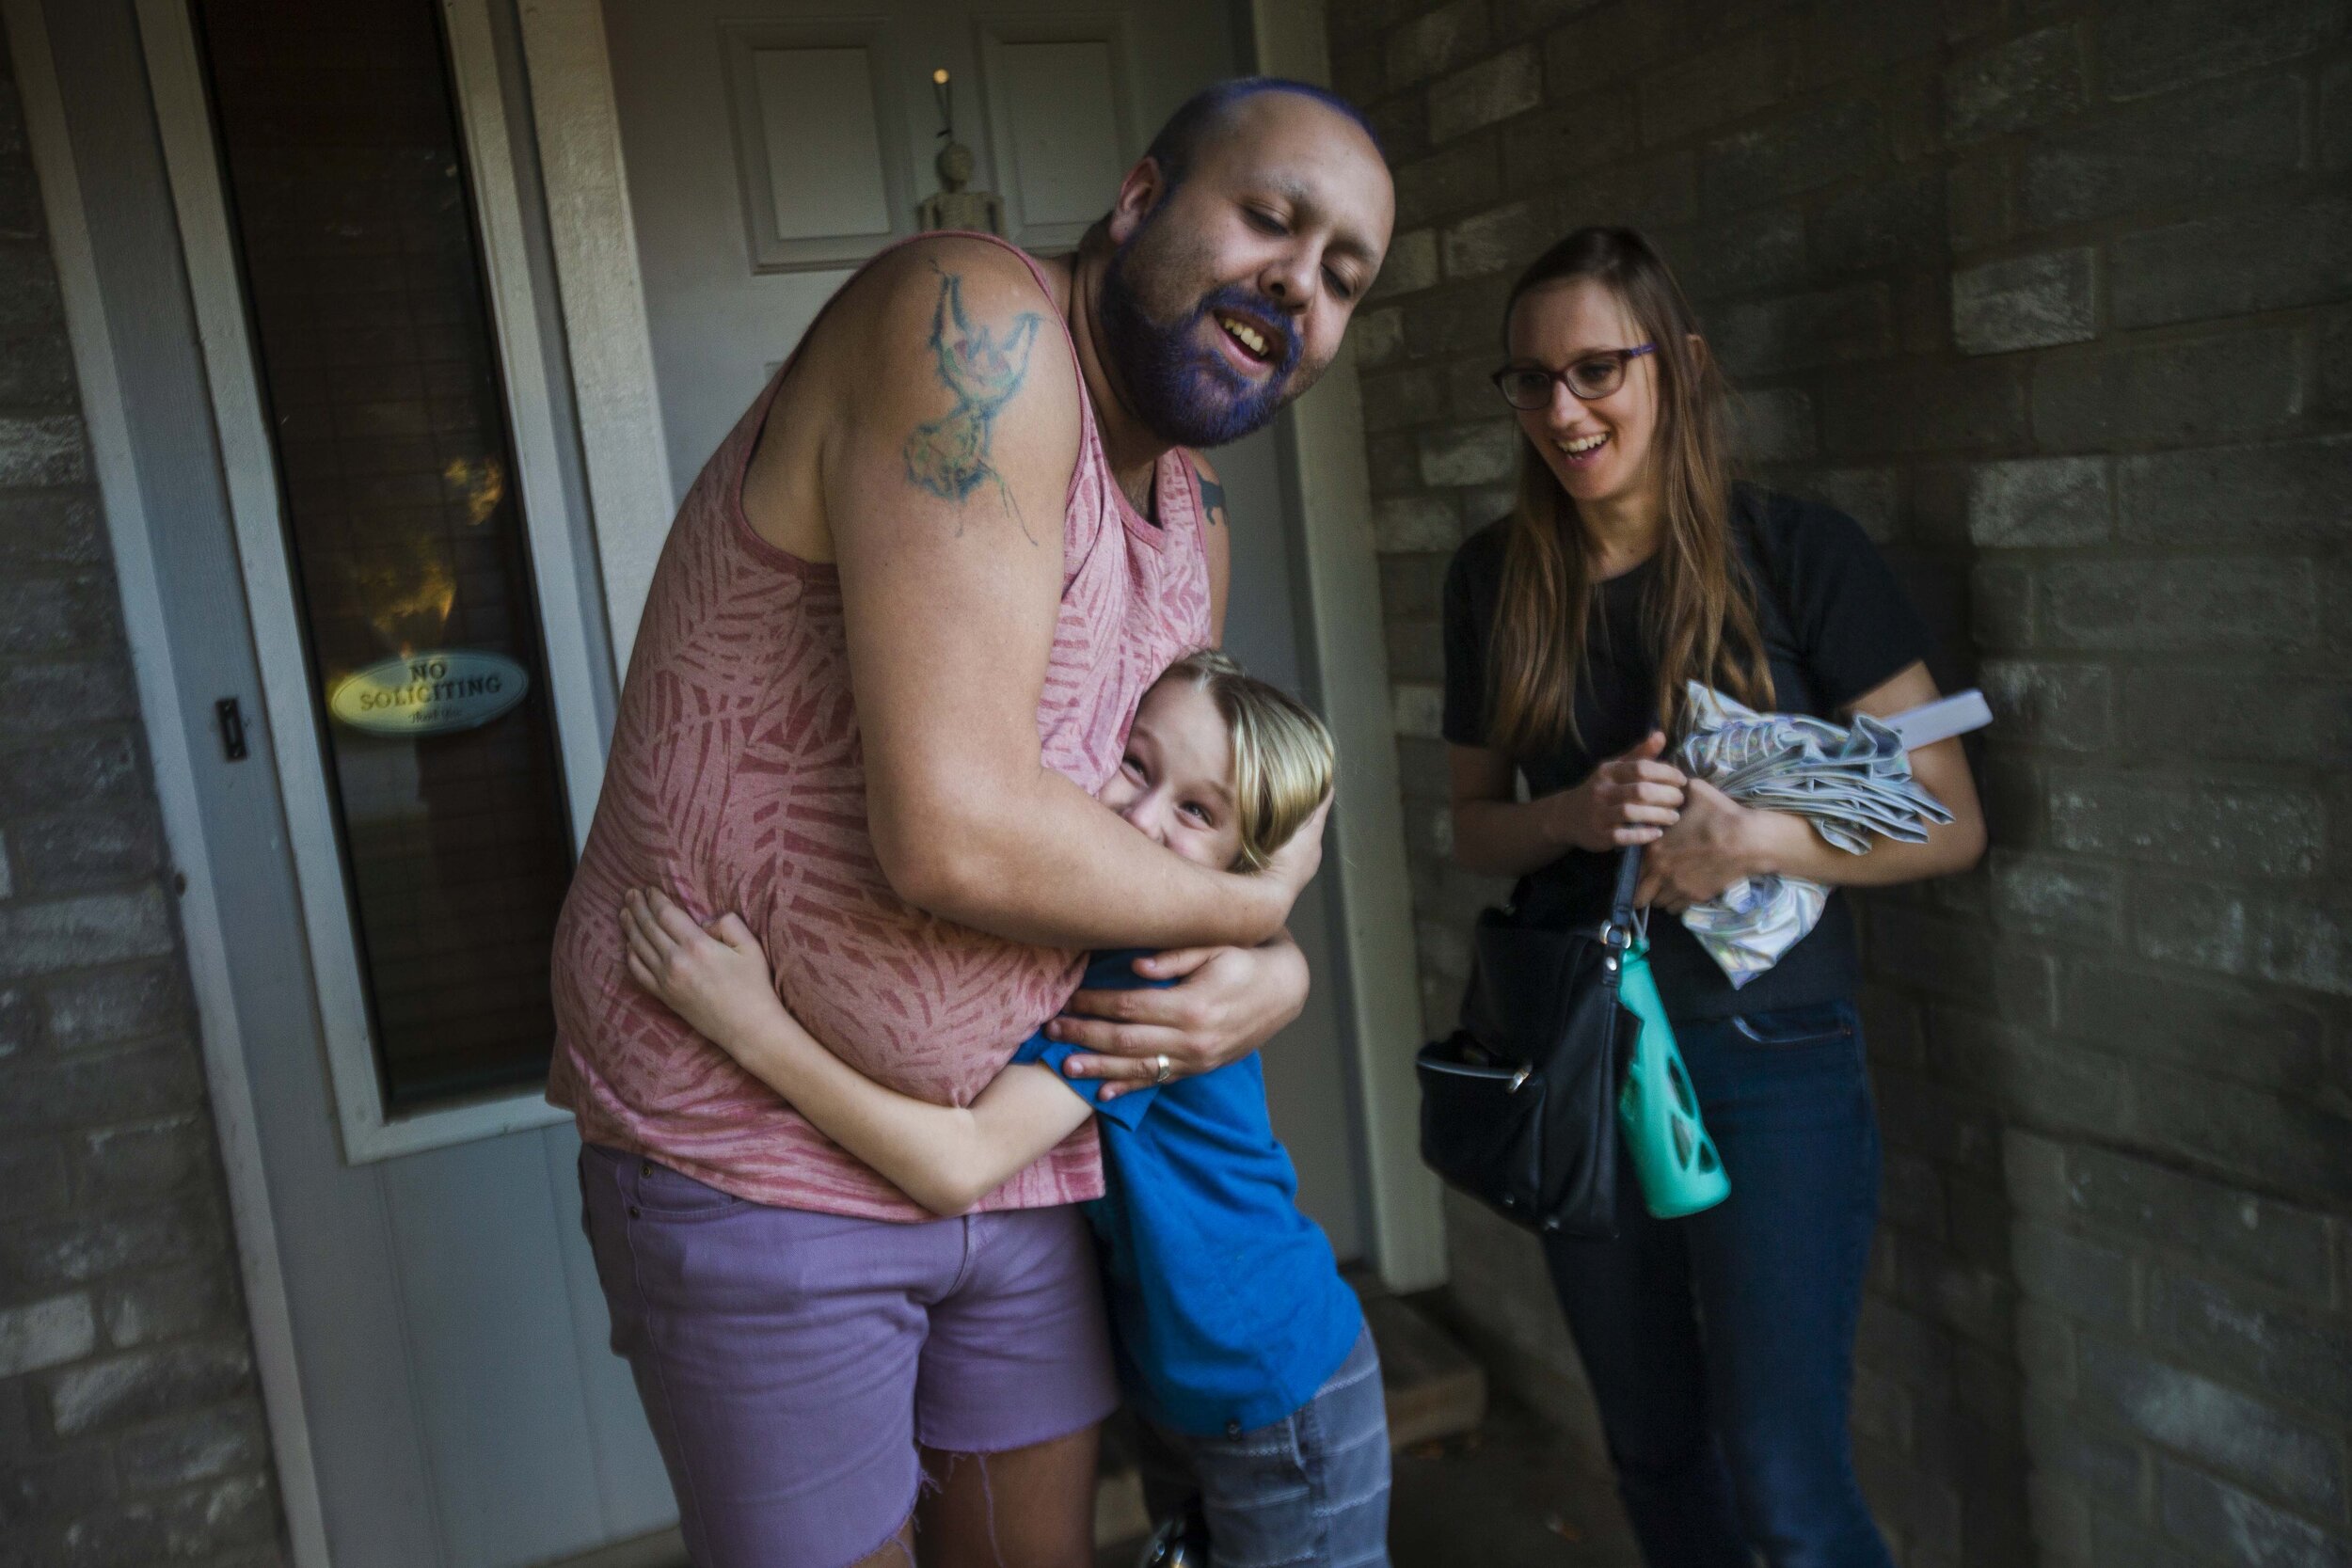  Robby, a drag queen, then 25, left, embraces Keegan, a gender creative child, then 8, middle, as Keegan's mother Megan, then 32, looks on following a rehearsal for Keegan's upcoming inaugural drag performance at the home Robby shares with his husban